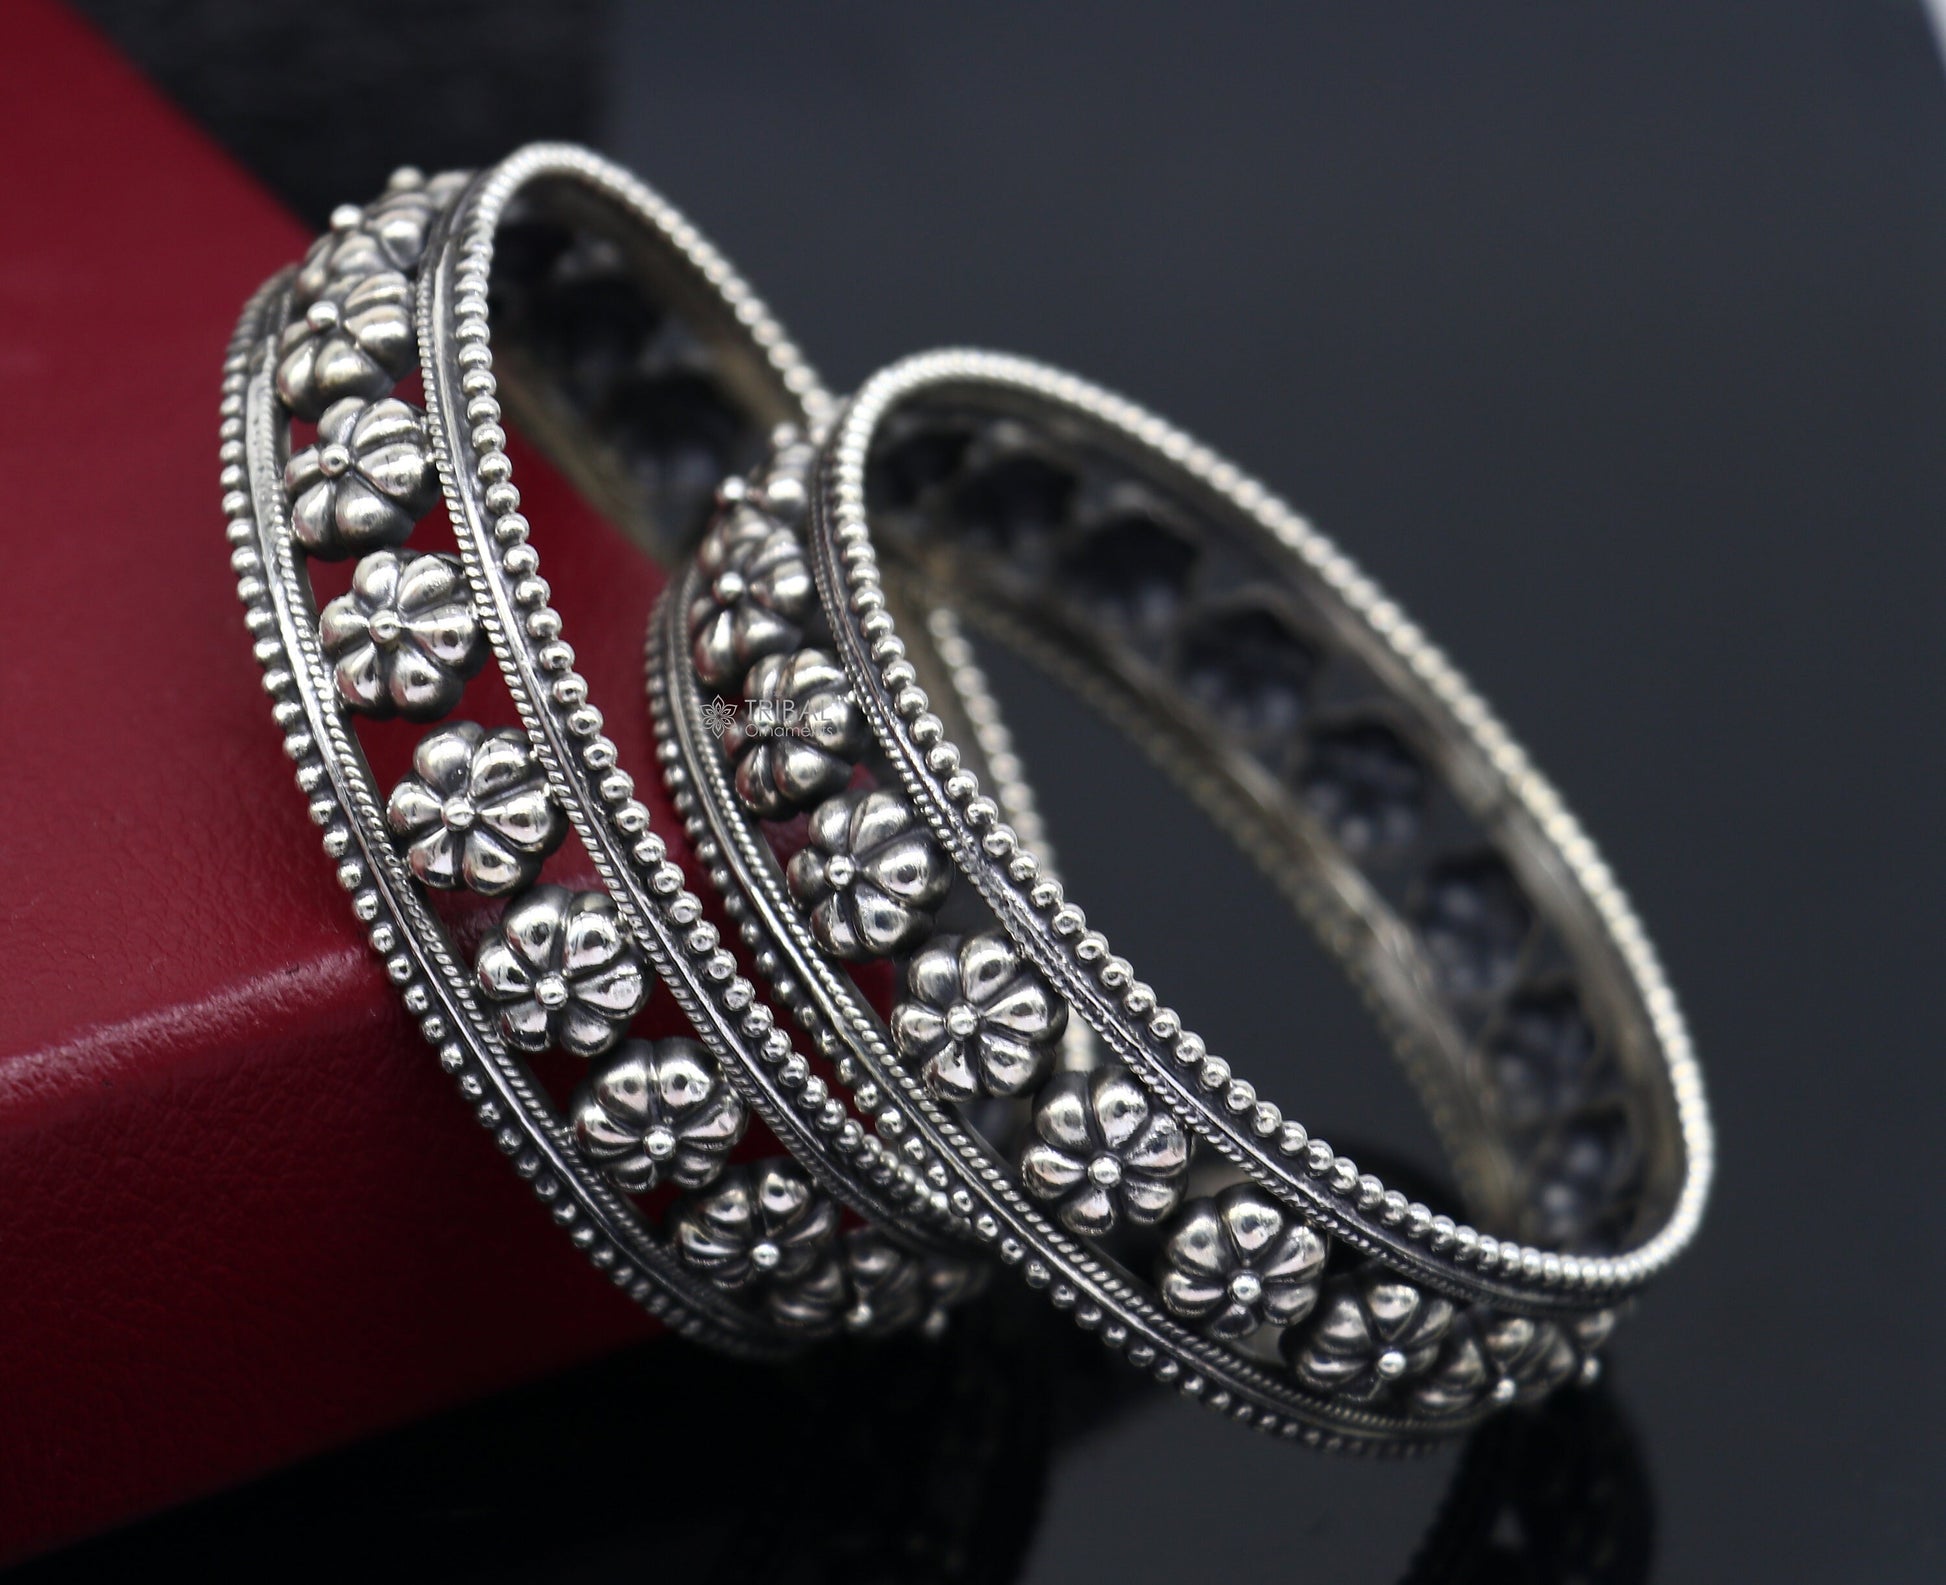 Exclusive 925 sterling silver flower design unique style handmade bangle bracelet , best brides collection wedding jewelry from india nba399 - TRIBAL ORNAMENTS